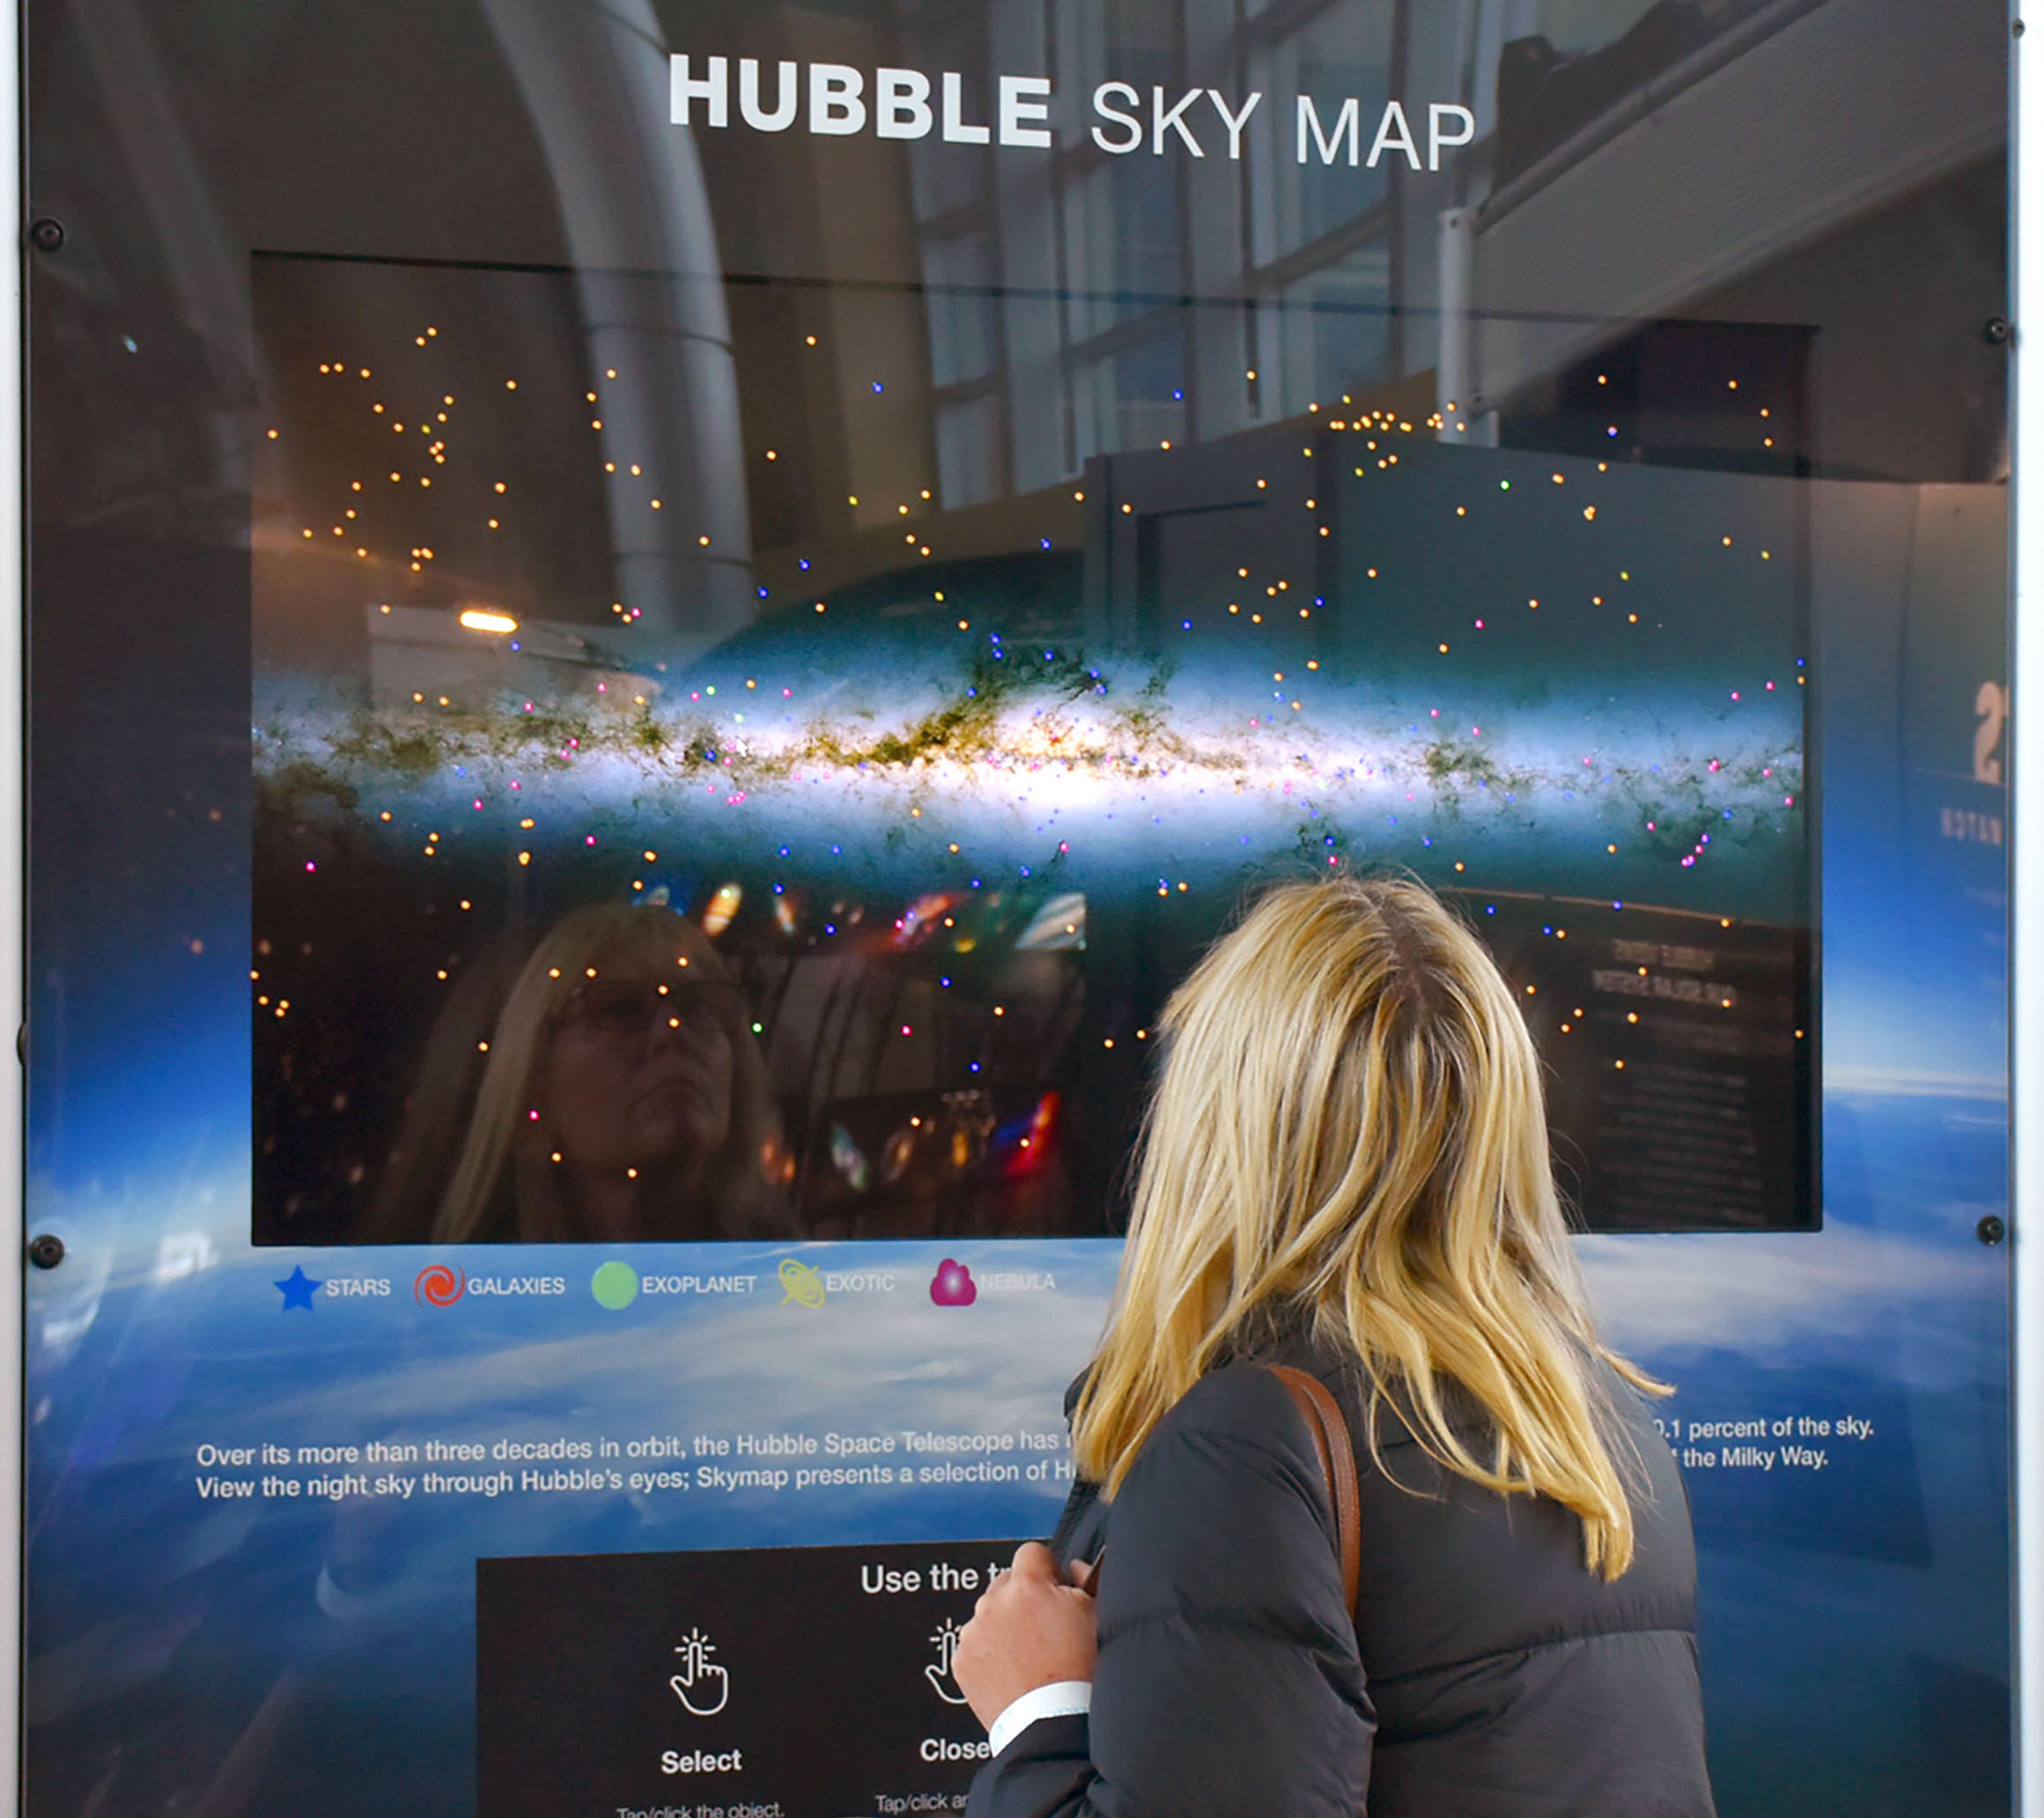 a women looking at a digital display of the Hubble Sky Map on Feb. 11 at INFINITY Science Center